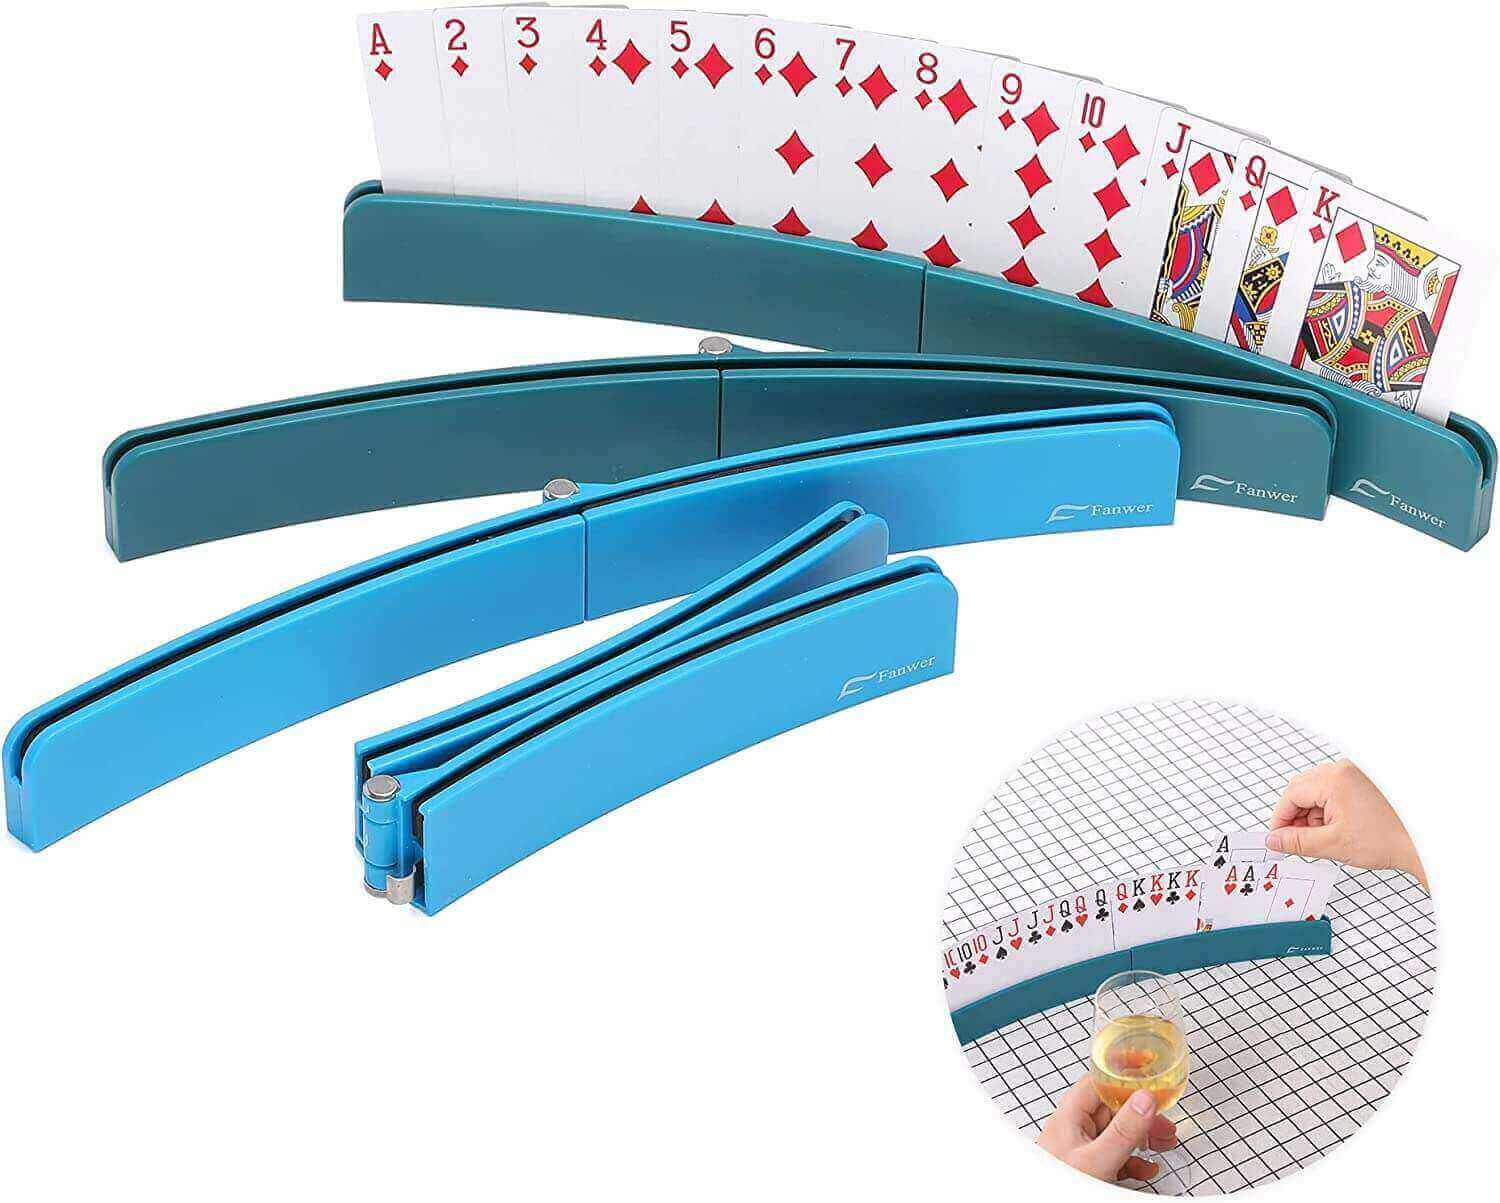 Fanwer poker card holder for playing cards, alternative of the feature image